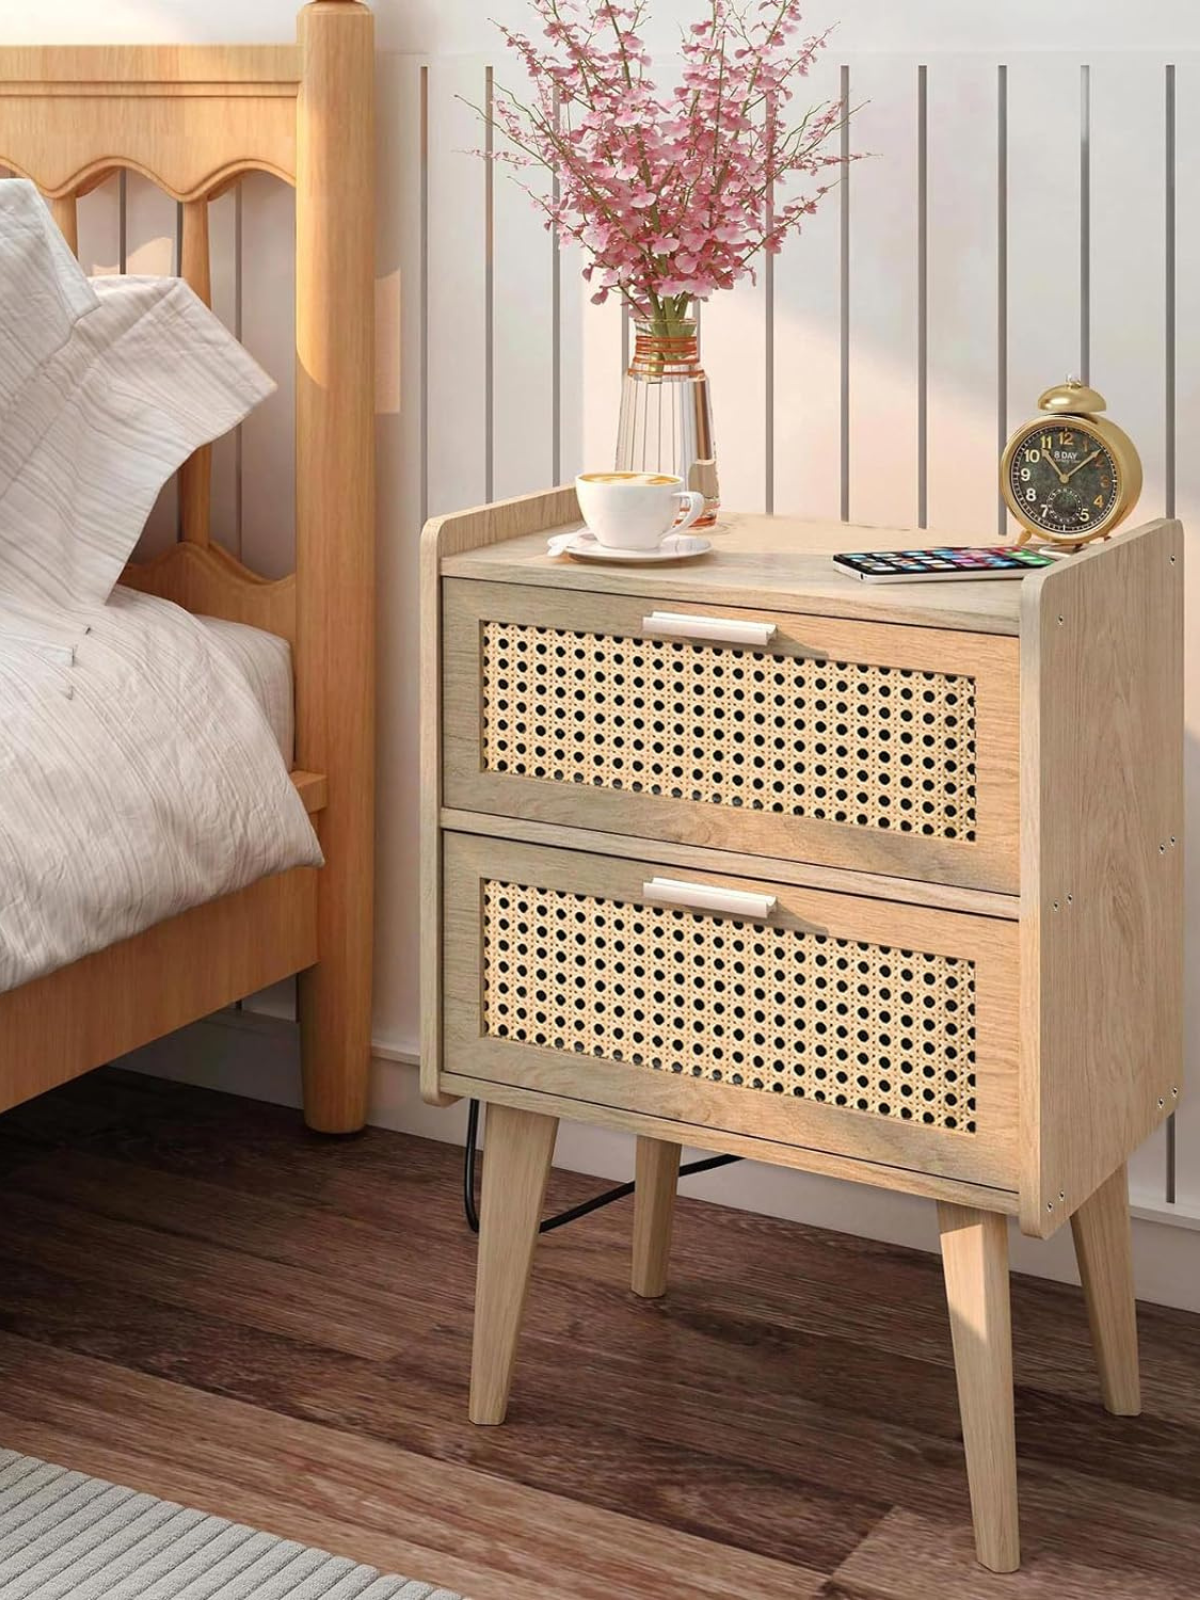 Rattan Nightstand, Side Table with Drawers, Boho Desk, Side Table, End Table, Rattan Furniture, Bed Side Table for Bedroom, Living Room, Dormitory